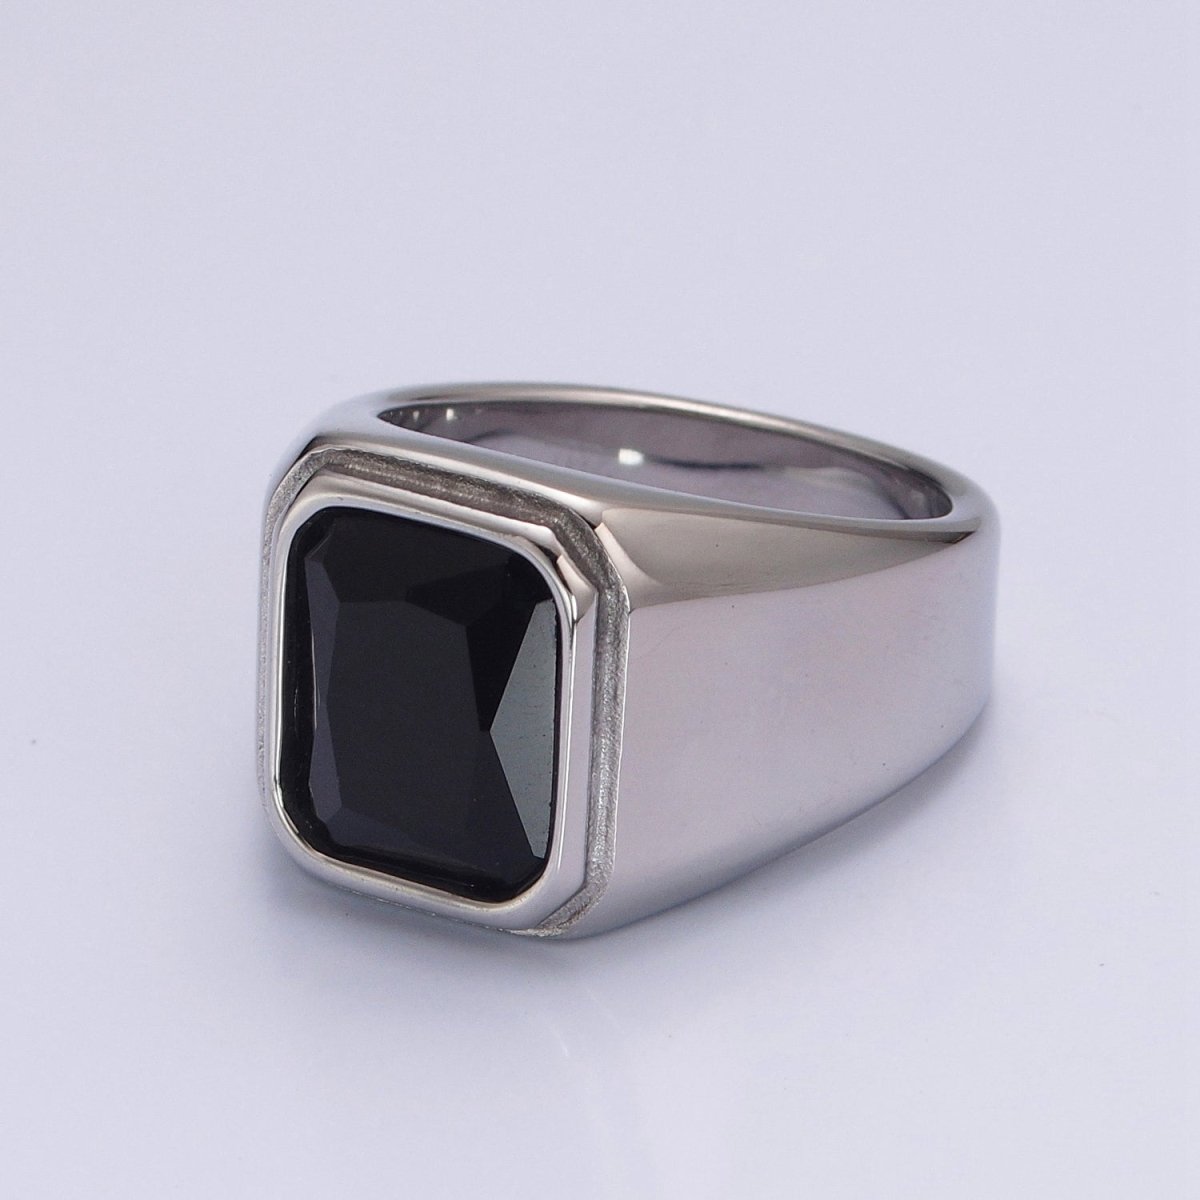 Stainless Steel Signet Rings for Men Black Silver Simple Square CZ Solid Polished Biker Band Pinky Thumb Ring O-814~O-820 - DLUXCA